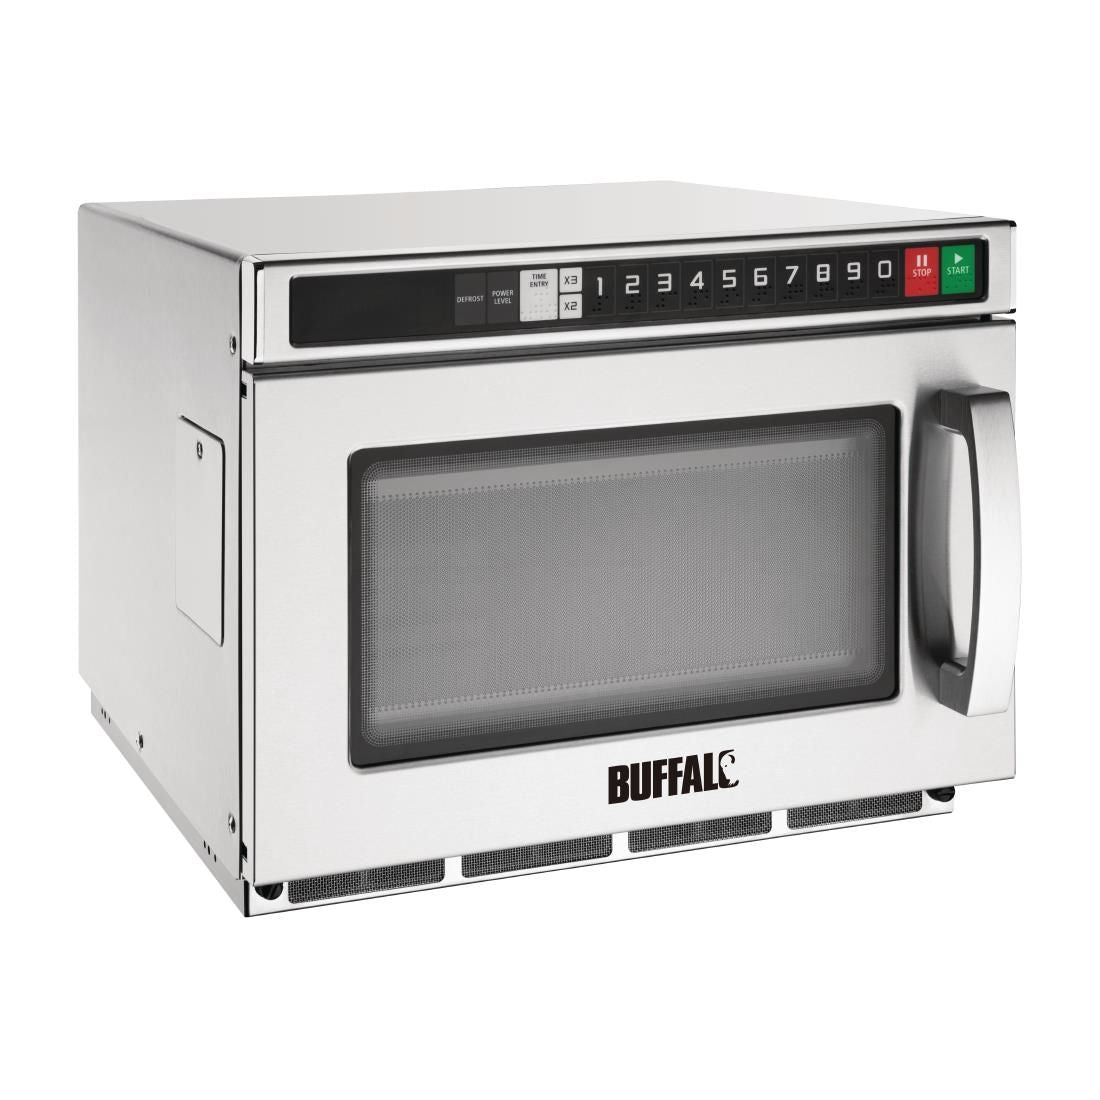 FB865 Buffalo Programmable Compact Microwave Oven 17ltr 1800W JD Catering Equipment Solutions Ltd